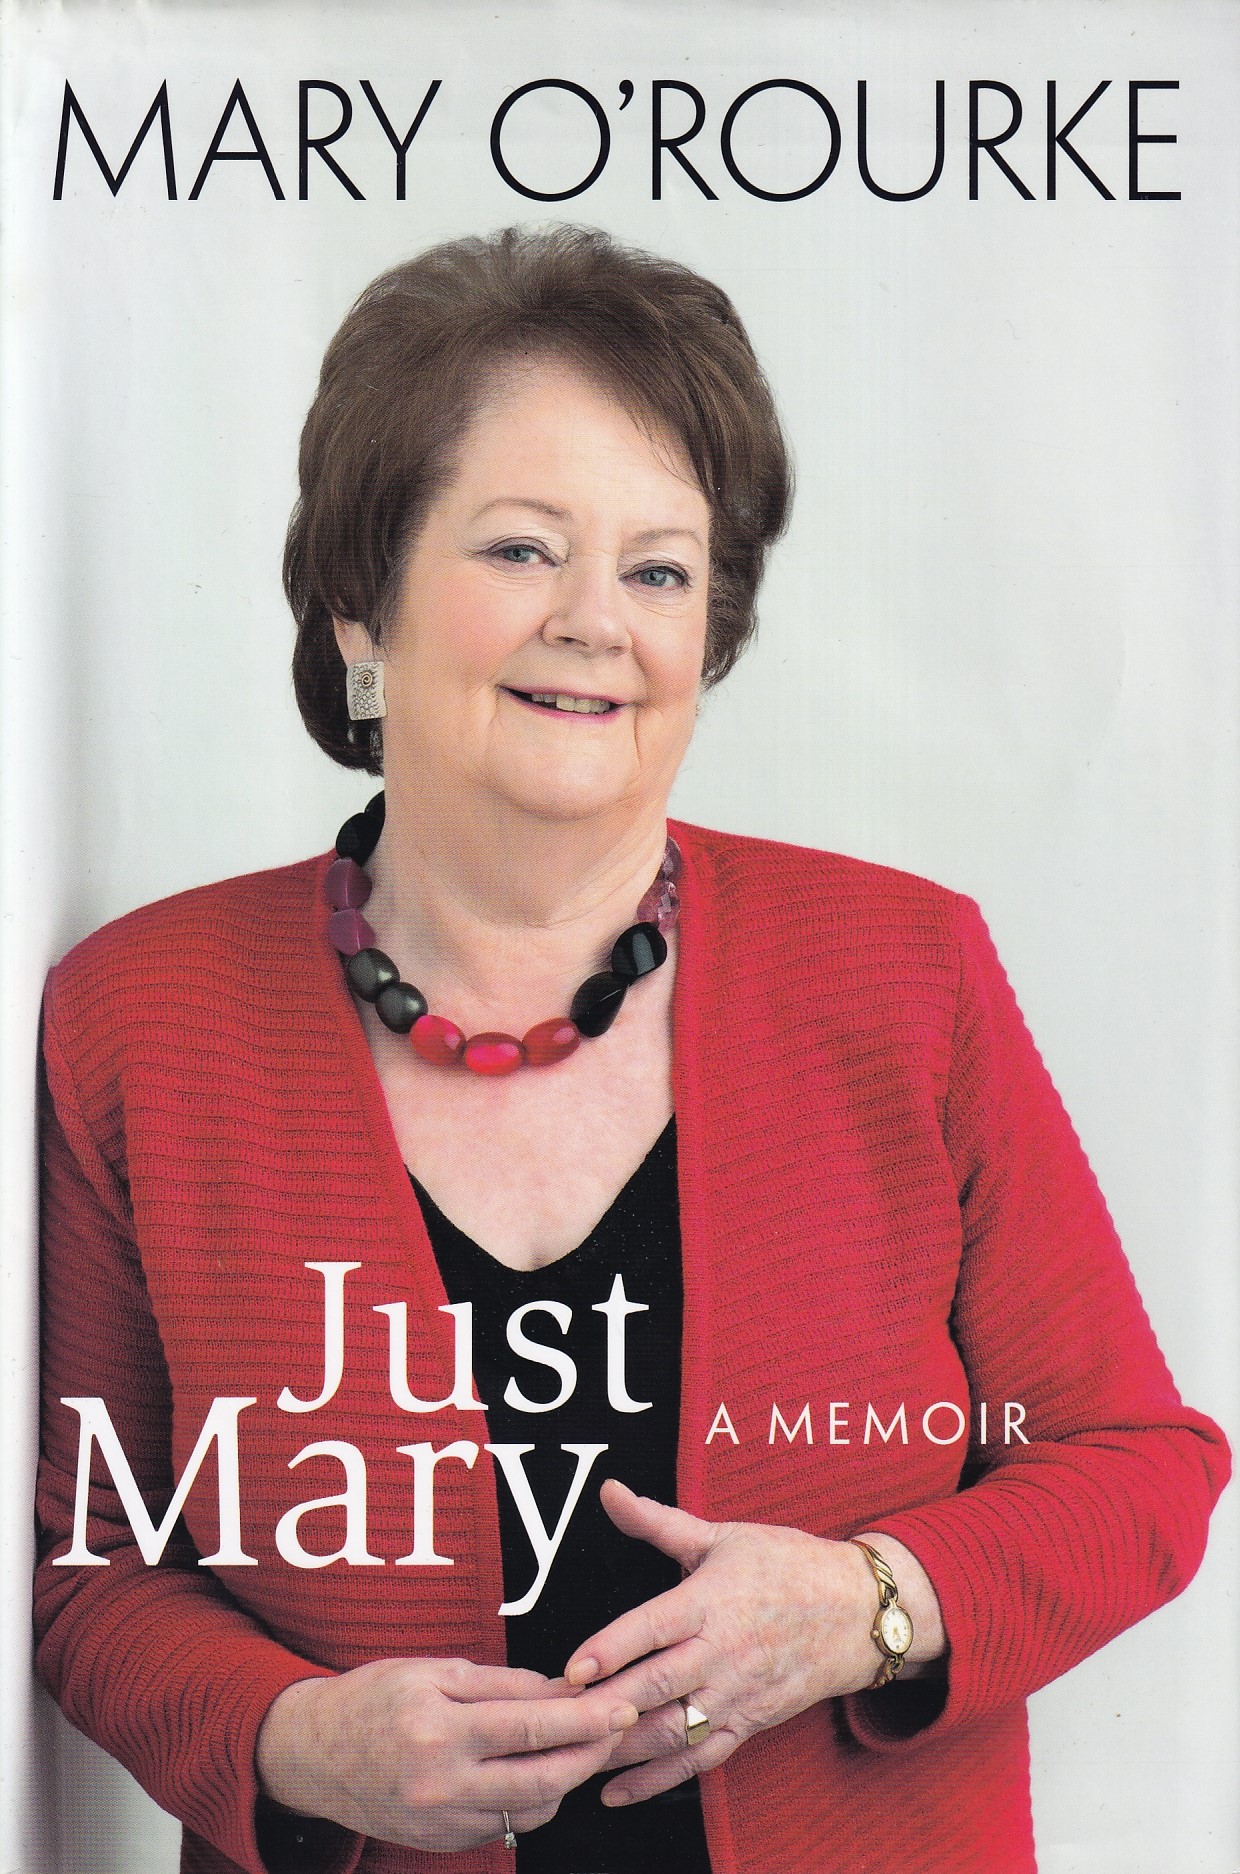 Just Mary: A Memoir [SIGNED] by Mary O'Rourke